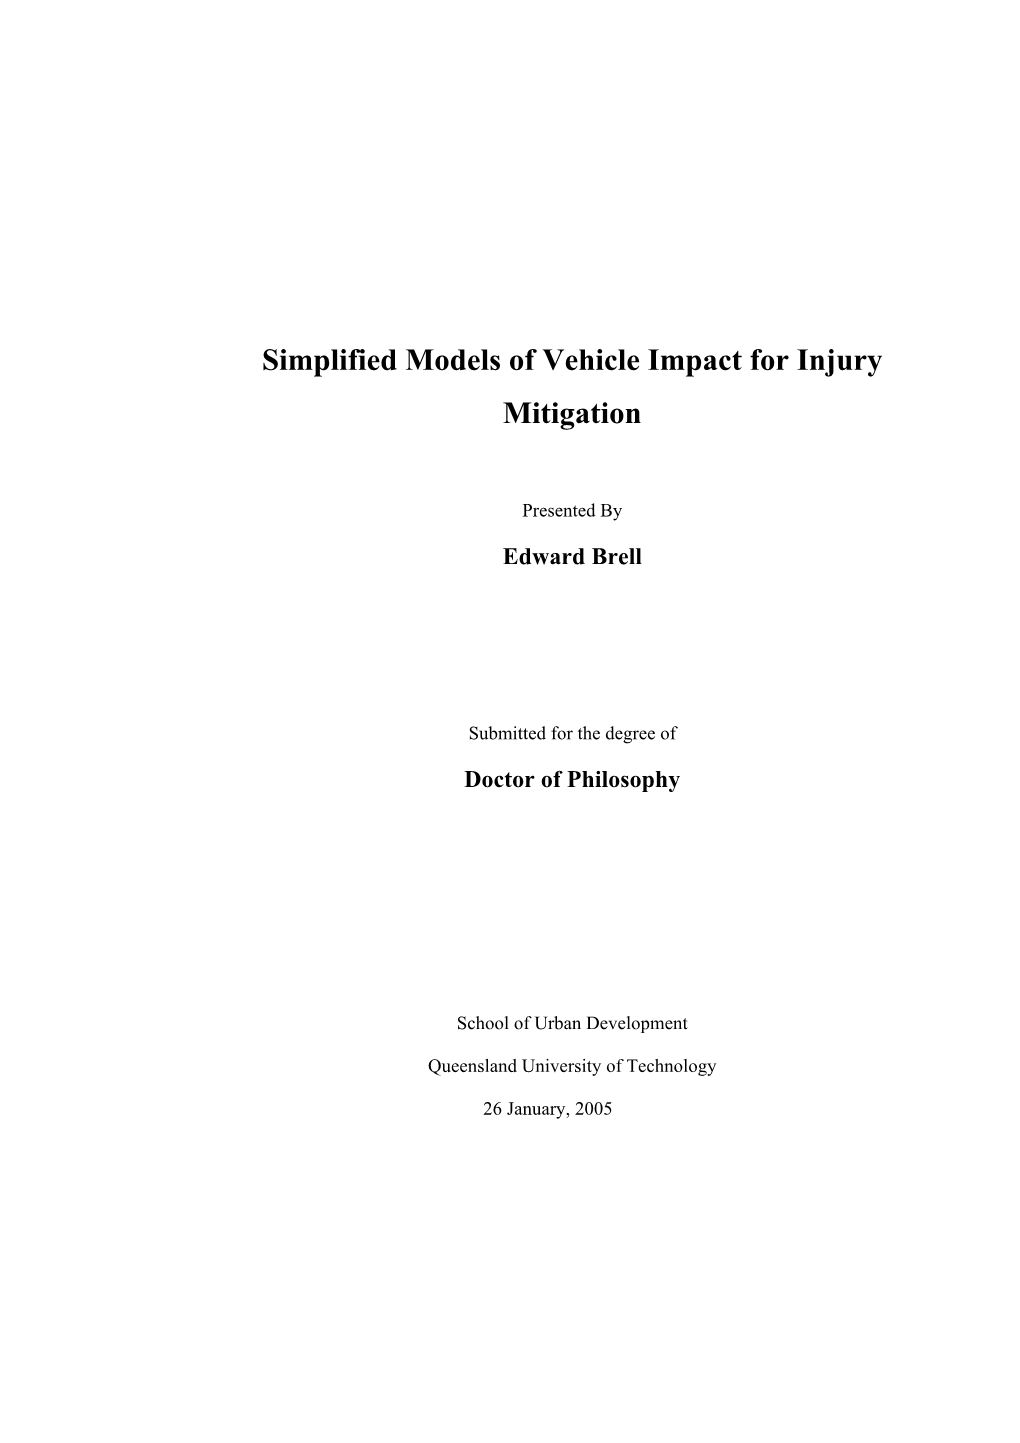 Simplified Models of Vehicle Impact for Injury Mitigation